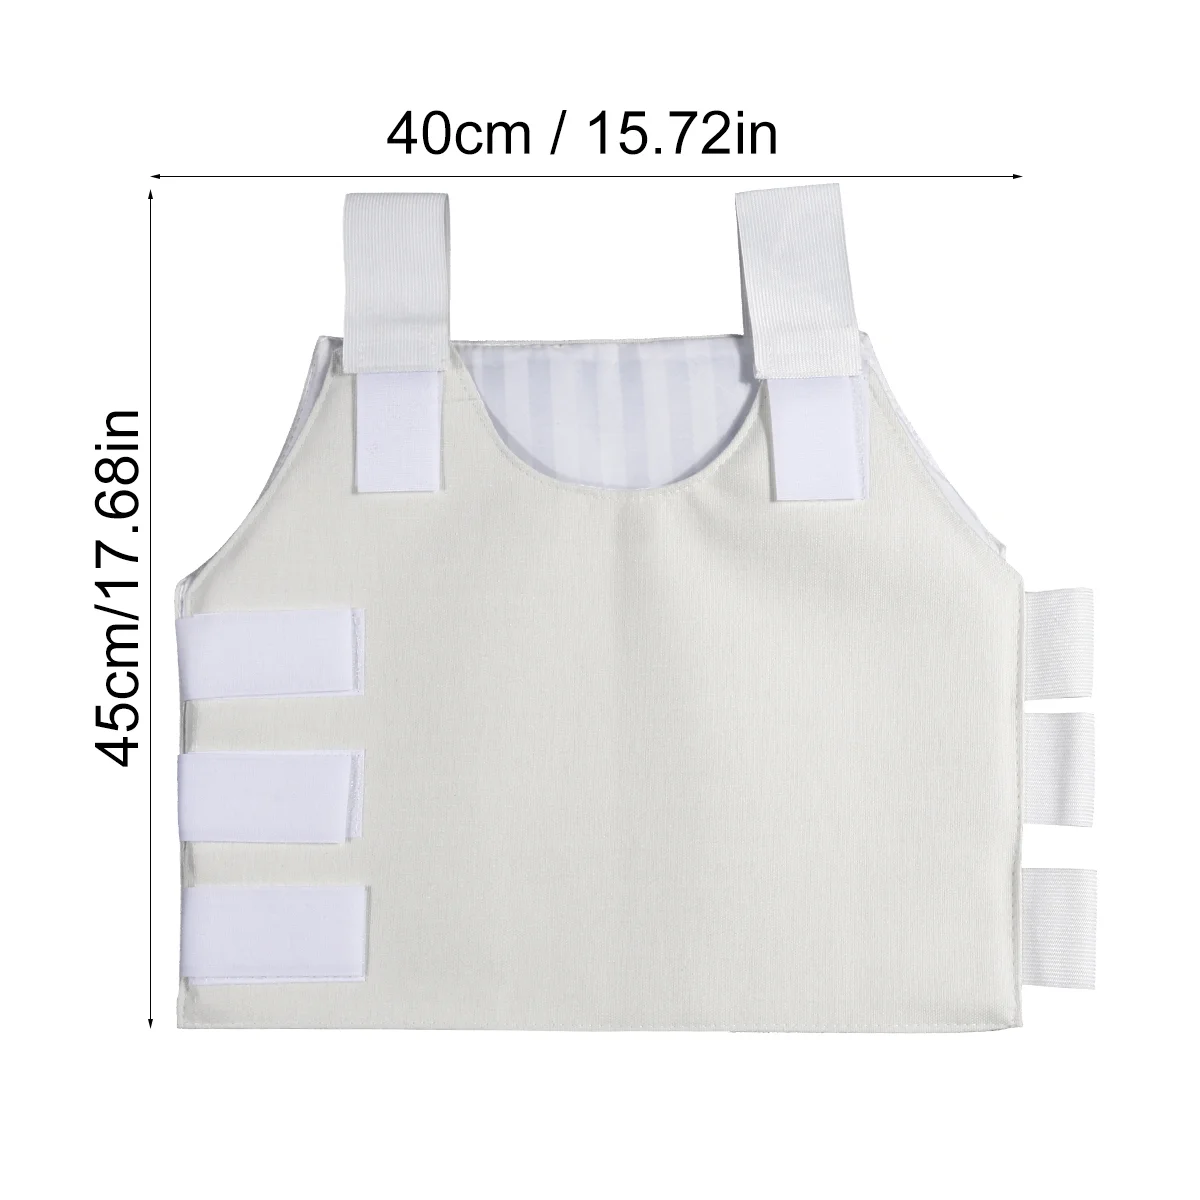 Adhesive Bruised Rib Protector Bruised Ribs Support Binder Clips Protective Belt